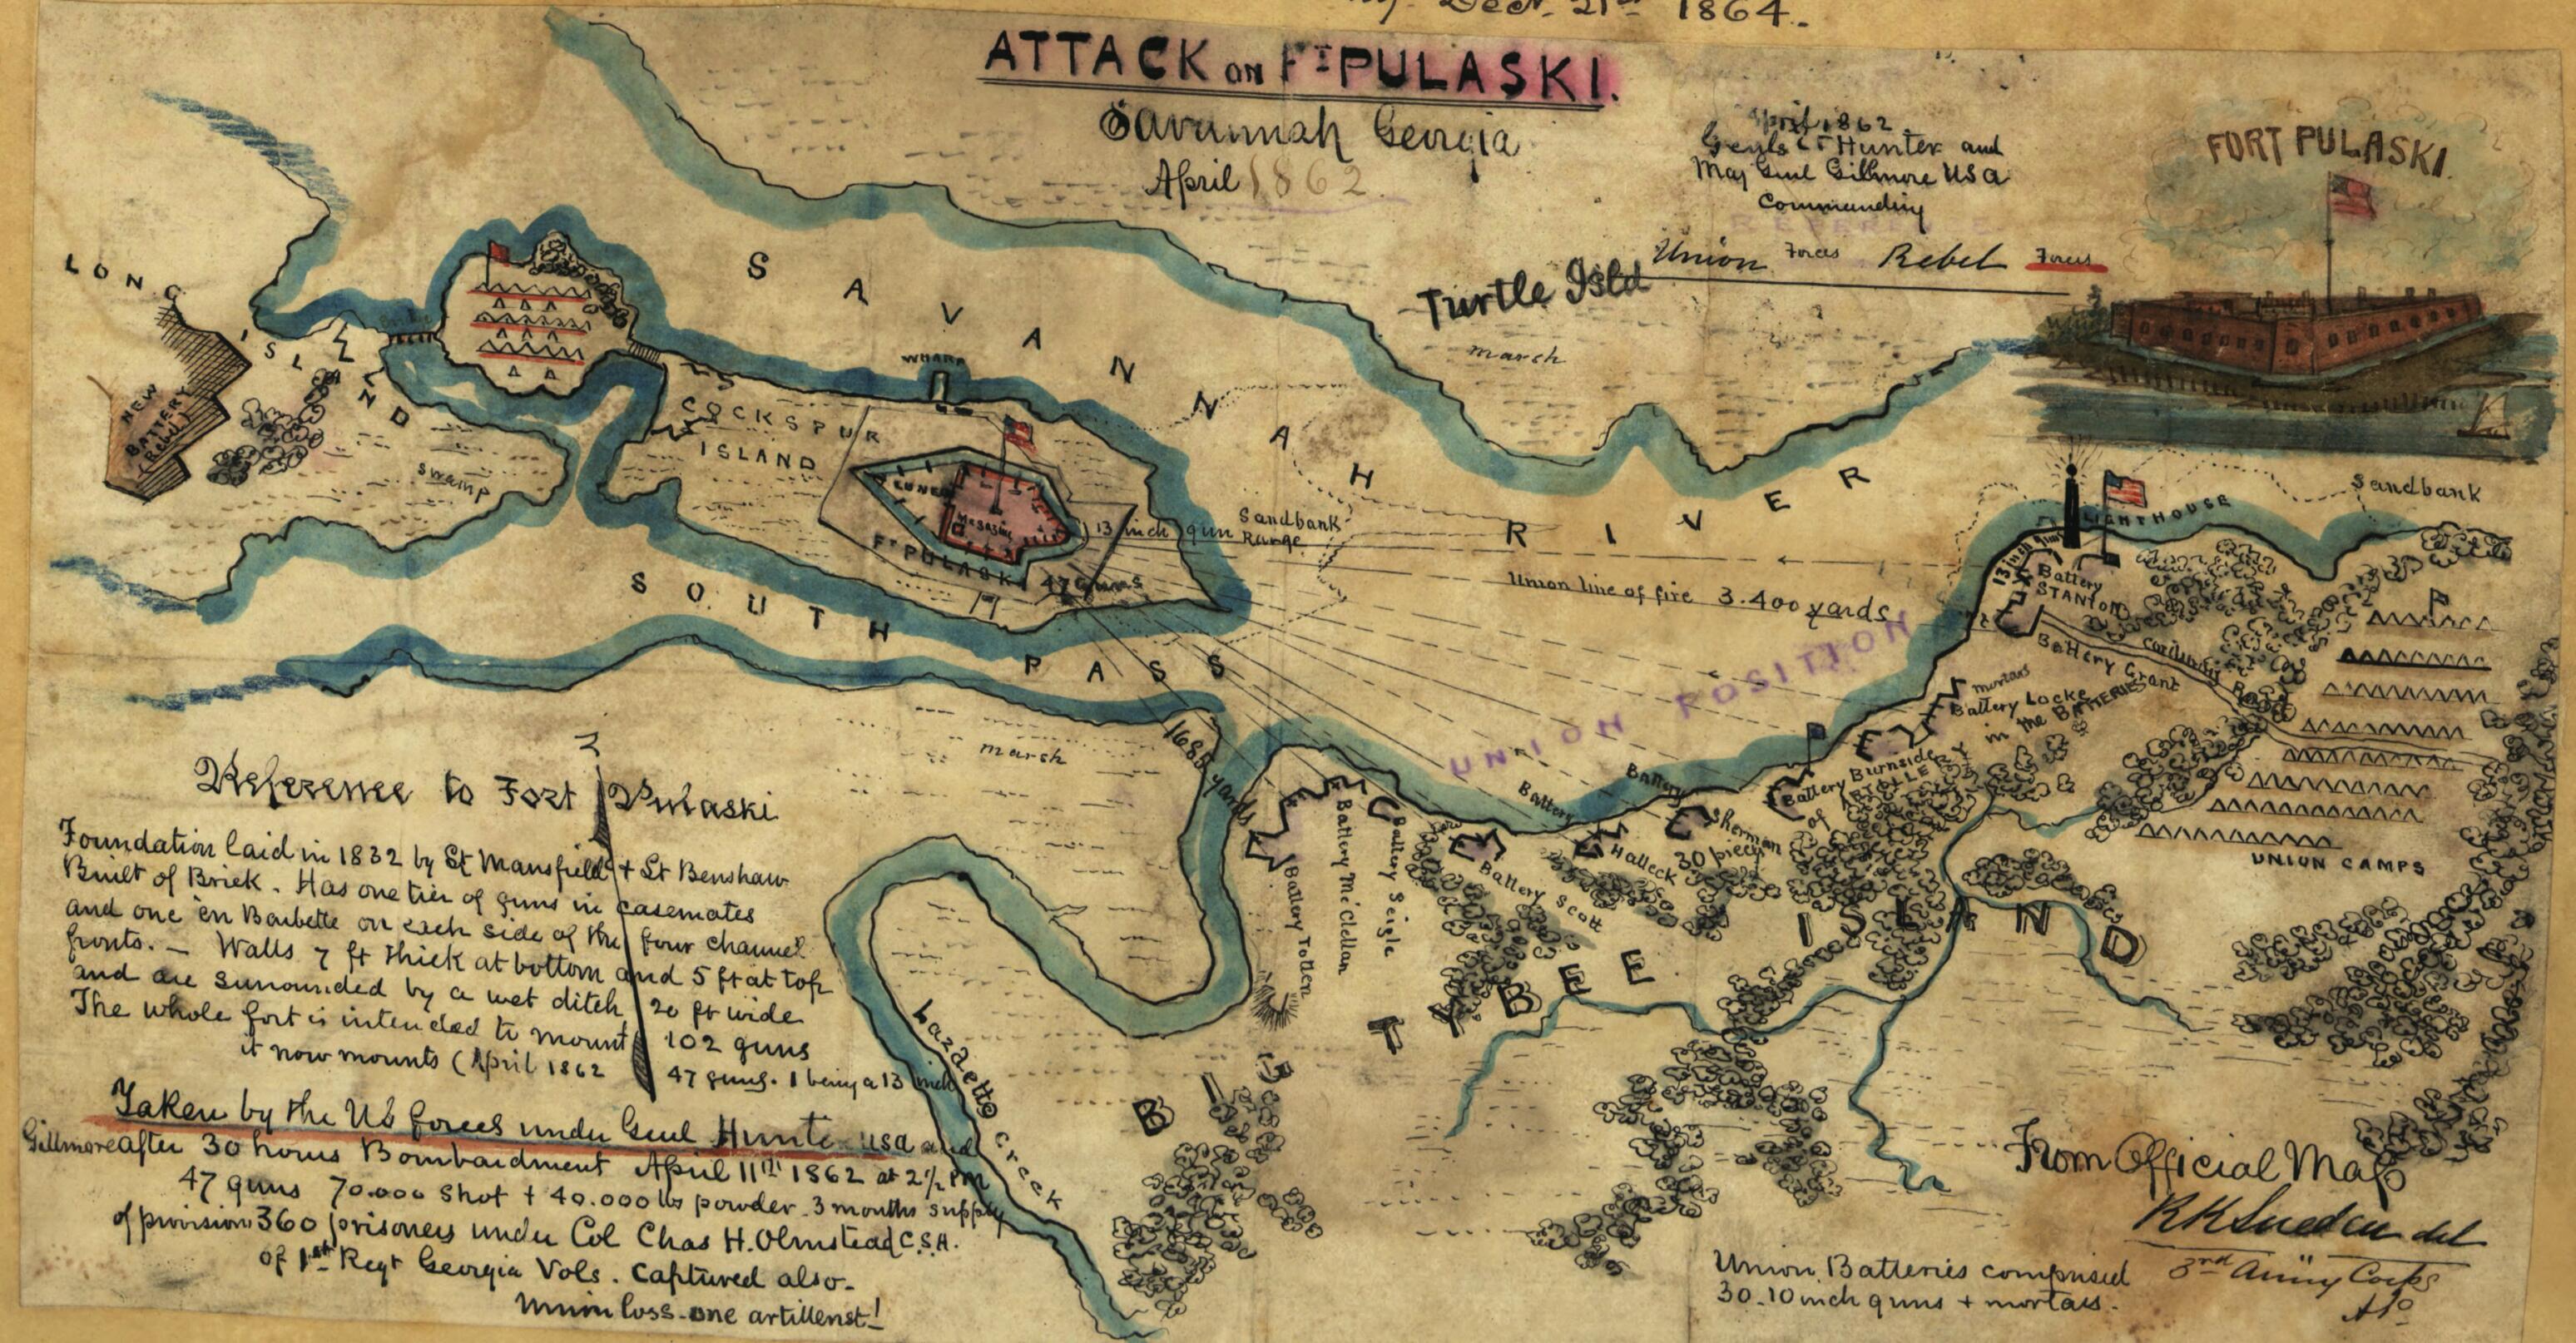 This old map of The Rebel Defences sic of Savannah, Georgia, 1864 from 1862 was created by Robert Knox Sneden in 1862